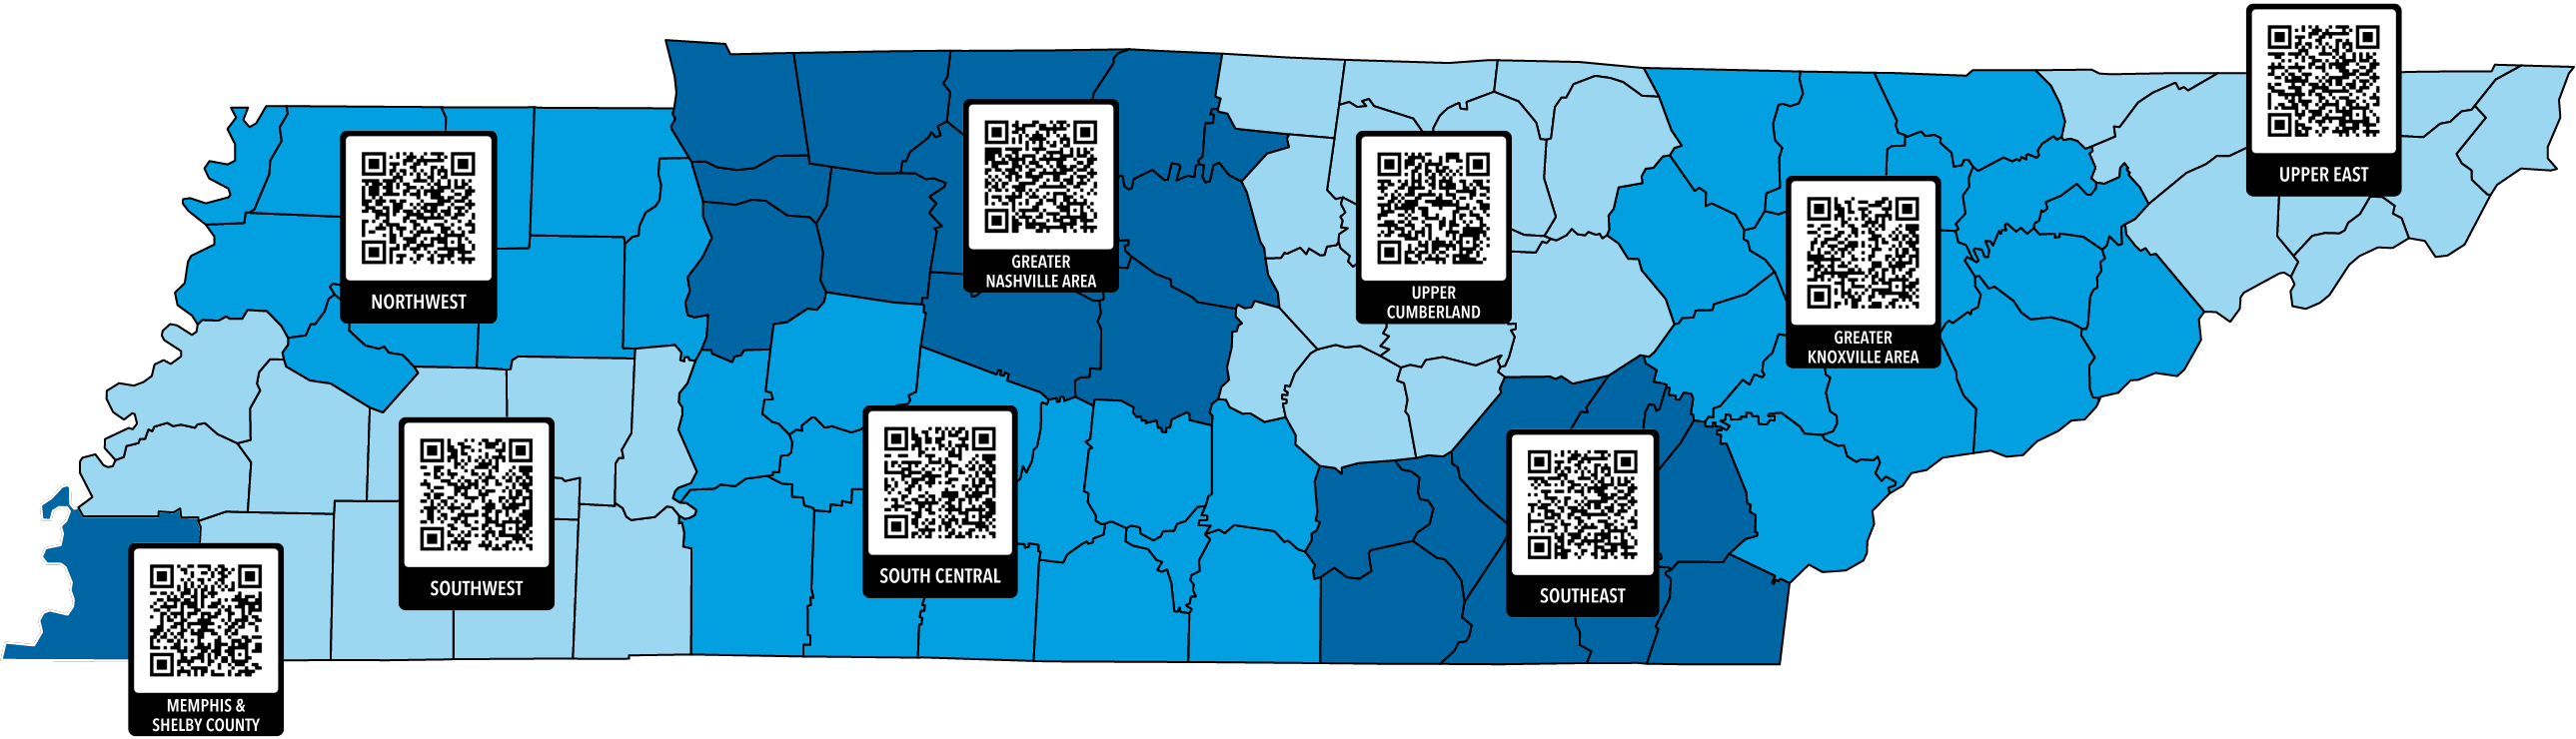 Map of Tennessee with colored regions and QR codes linked to regional Facebook groups